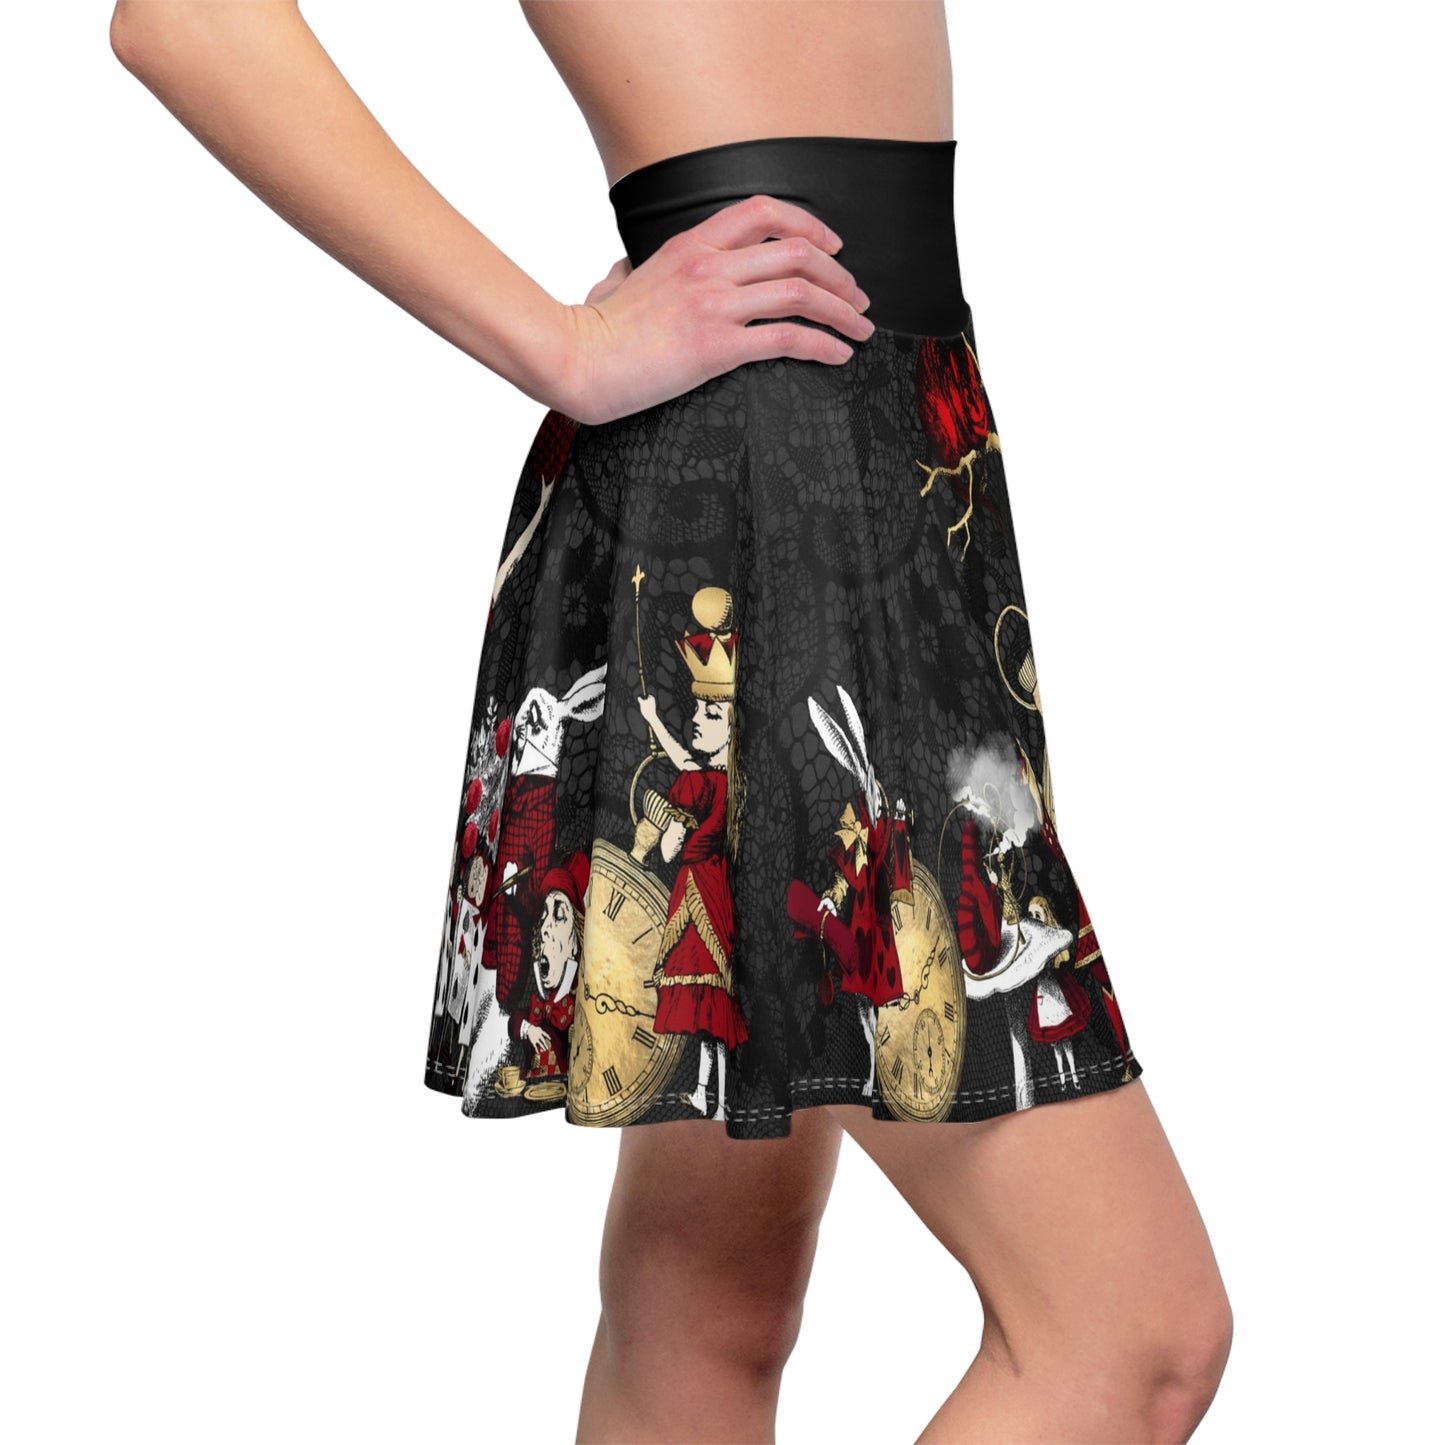 Alice in Wonderland Gothic Skirt - Queen of Hearts Mad Hatter Tea Party Skirt